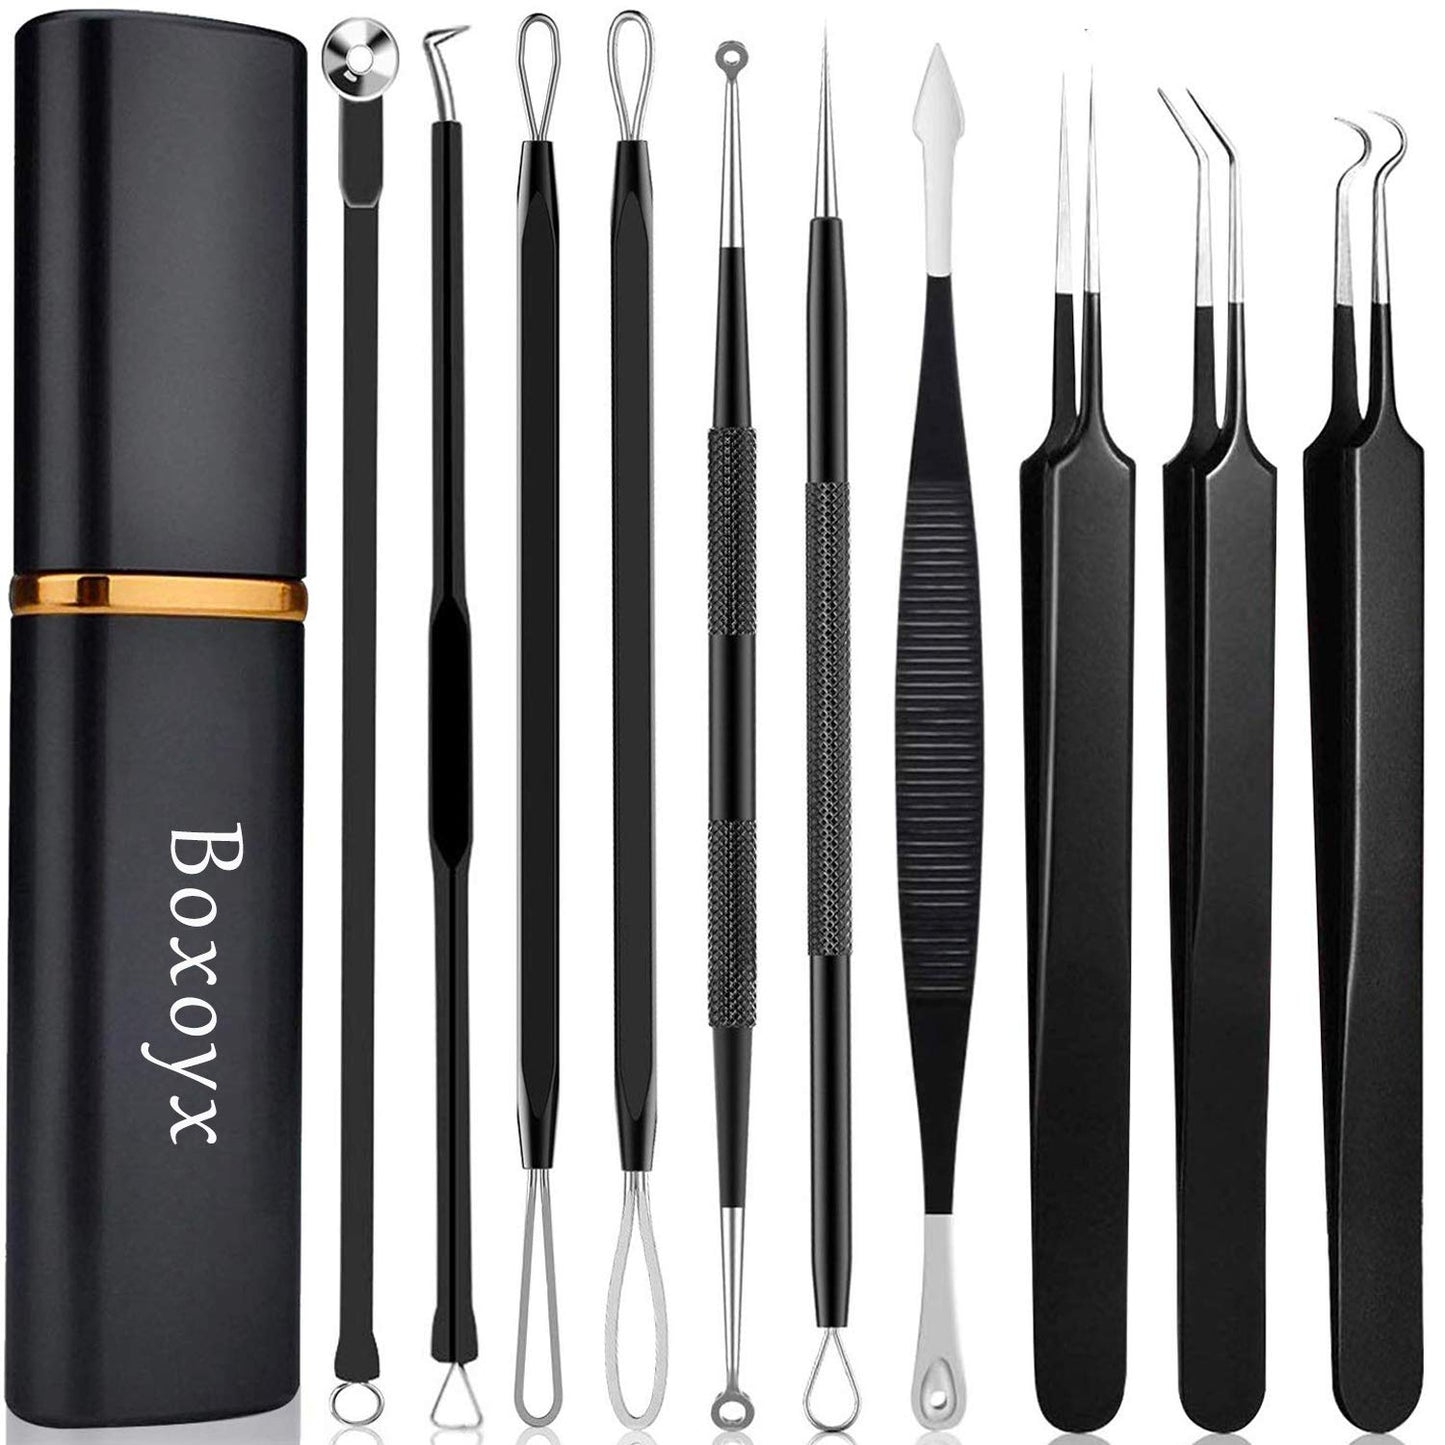 A set of ten pimple popper tools along with a carry case for the tools.